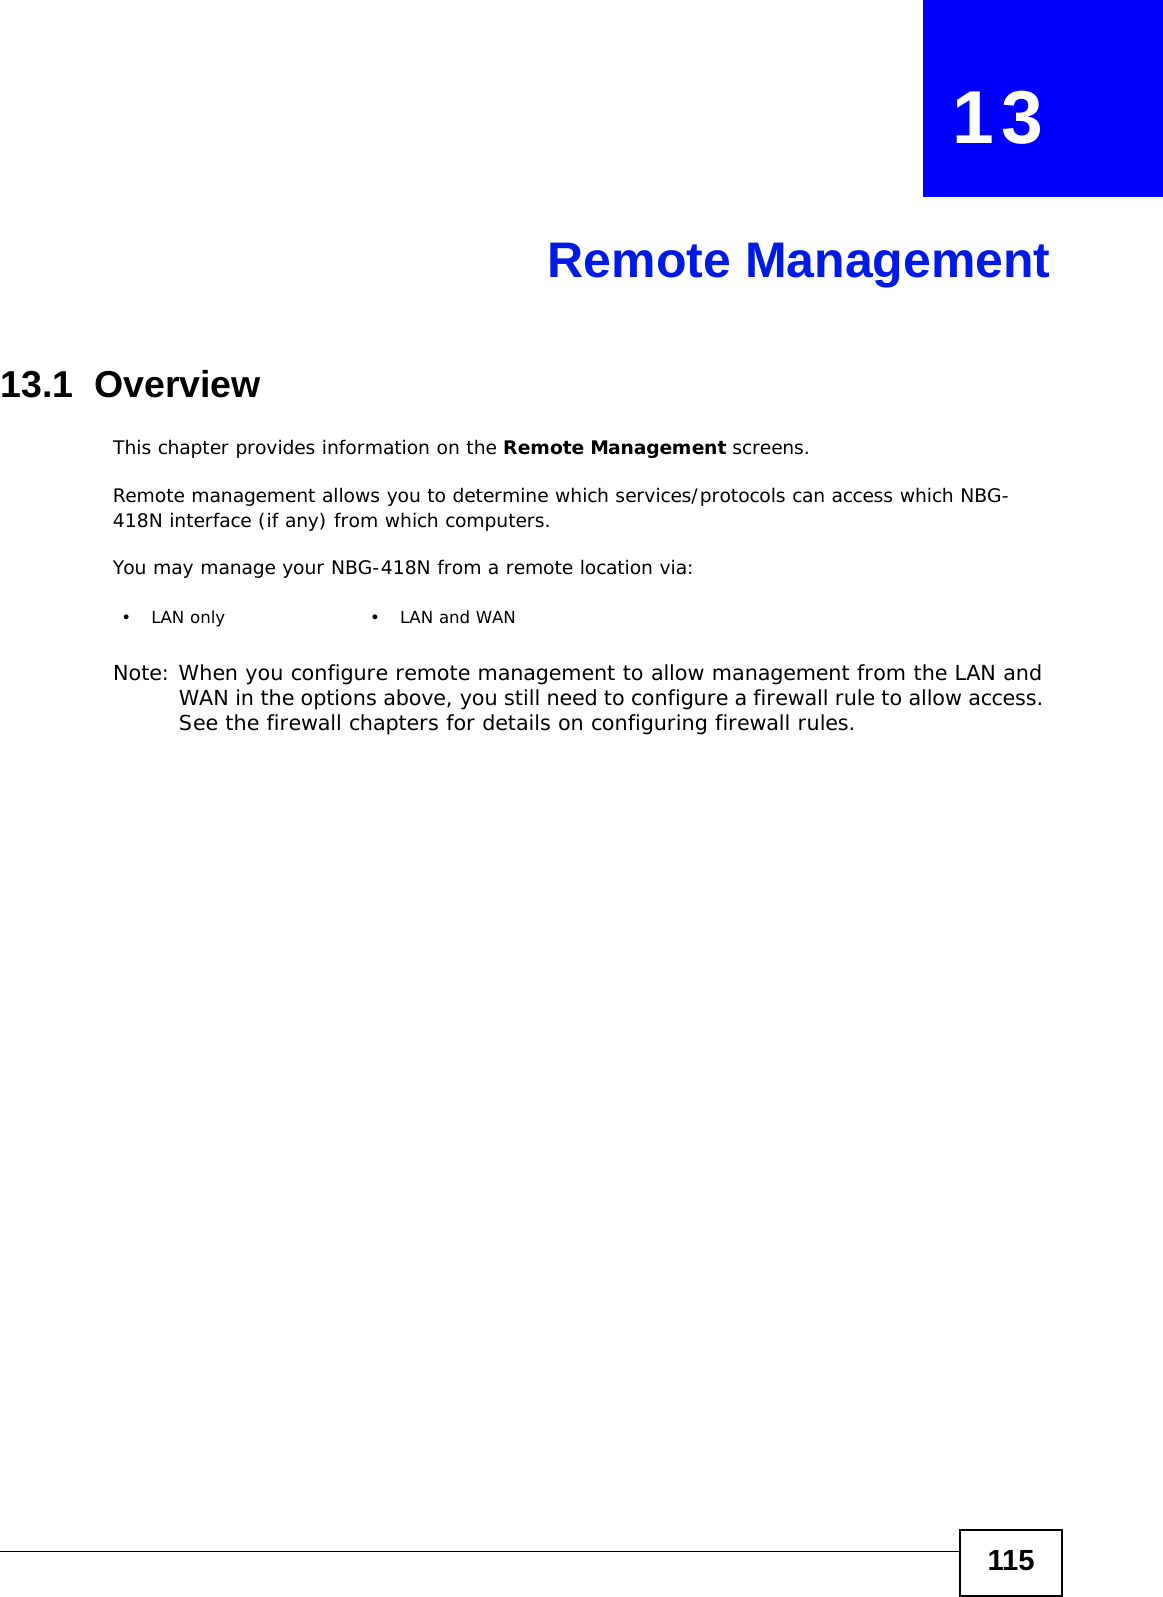 115CHAPTER   13Remote Management13.1  OverviewThis chapter provides information on the Remote Management screens. Remote management allows you to determine which services/protocols can access which NBG-418N interface (if any) from which computers.You may manage your NBG-418N from a remote location via:Note: When you configure remote management to allow management from the LAN and WAN in the options above, you still need to configure a firewall rule to allow access. See the firewall chapters for details on configuring firewall rules.•LAN only •LAN and WAN